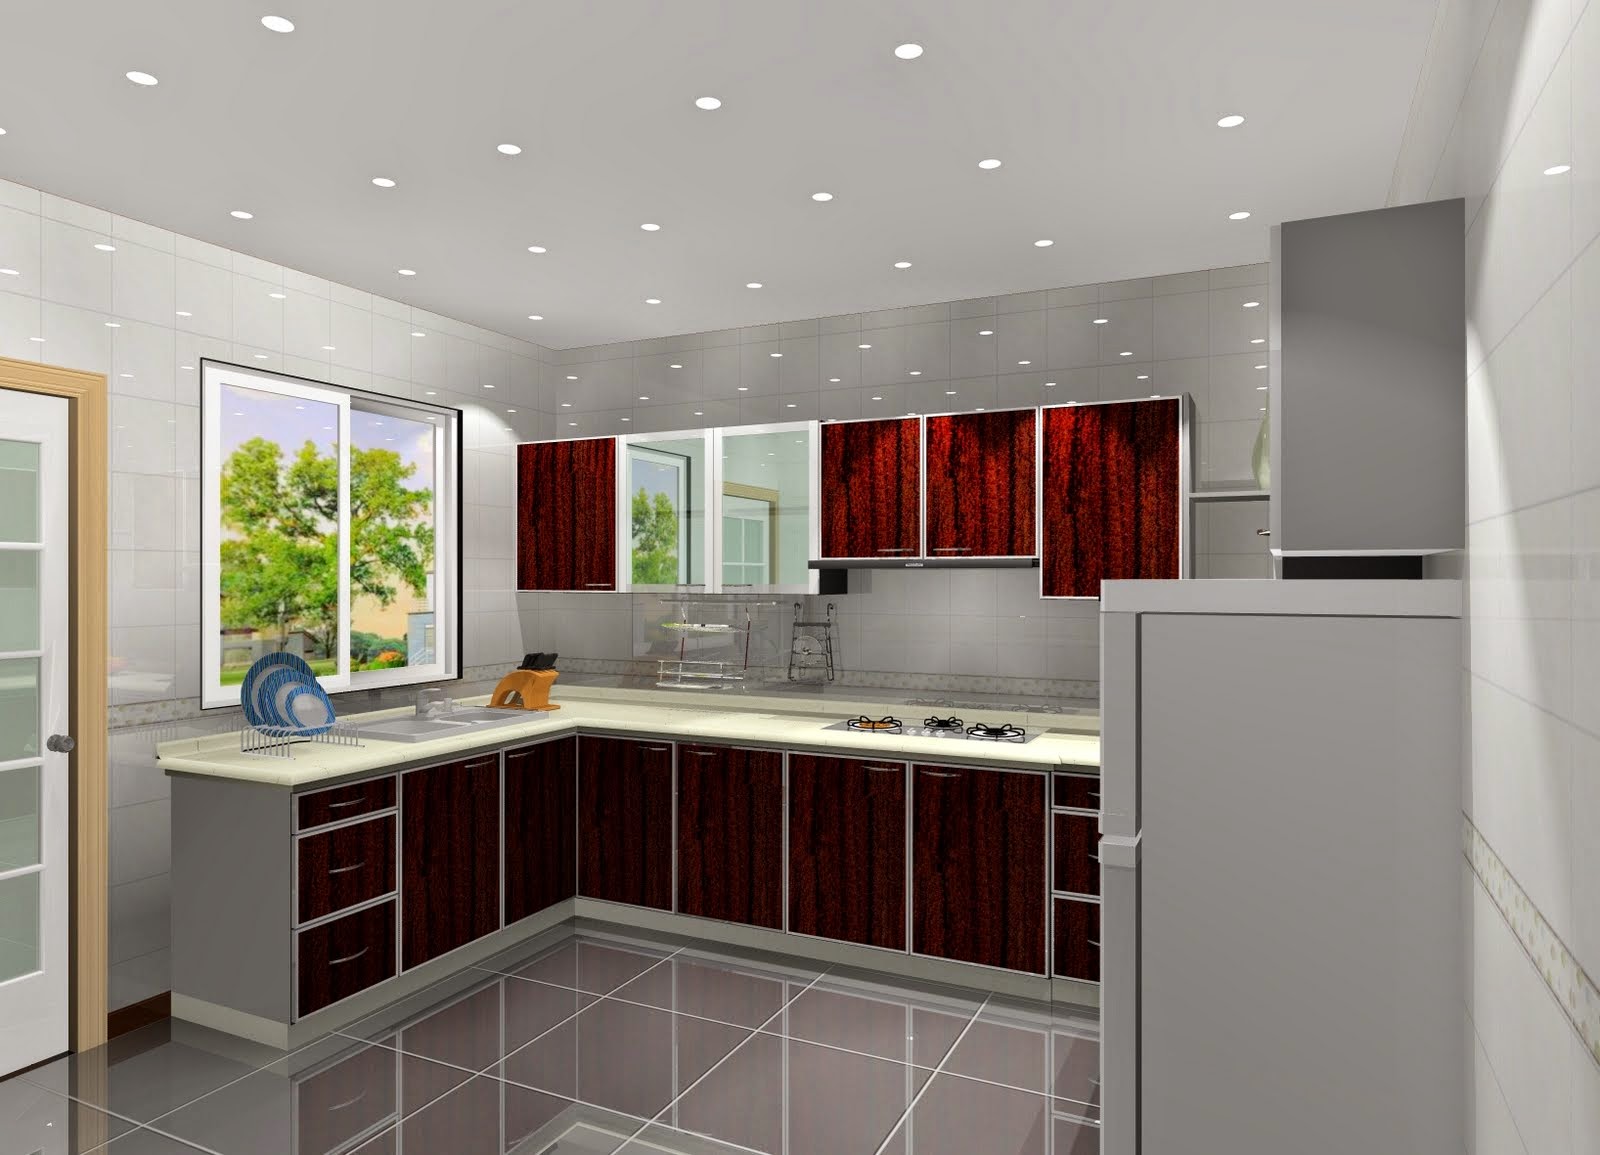 Kitchen for a Minimalist House 7